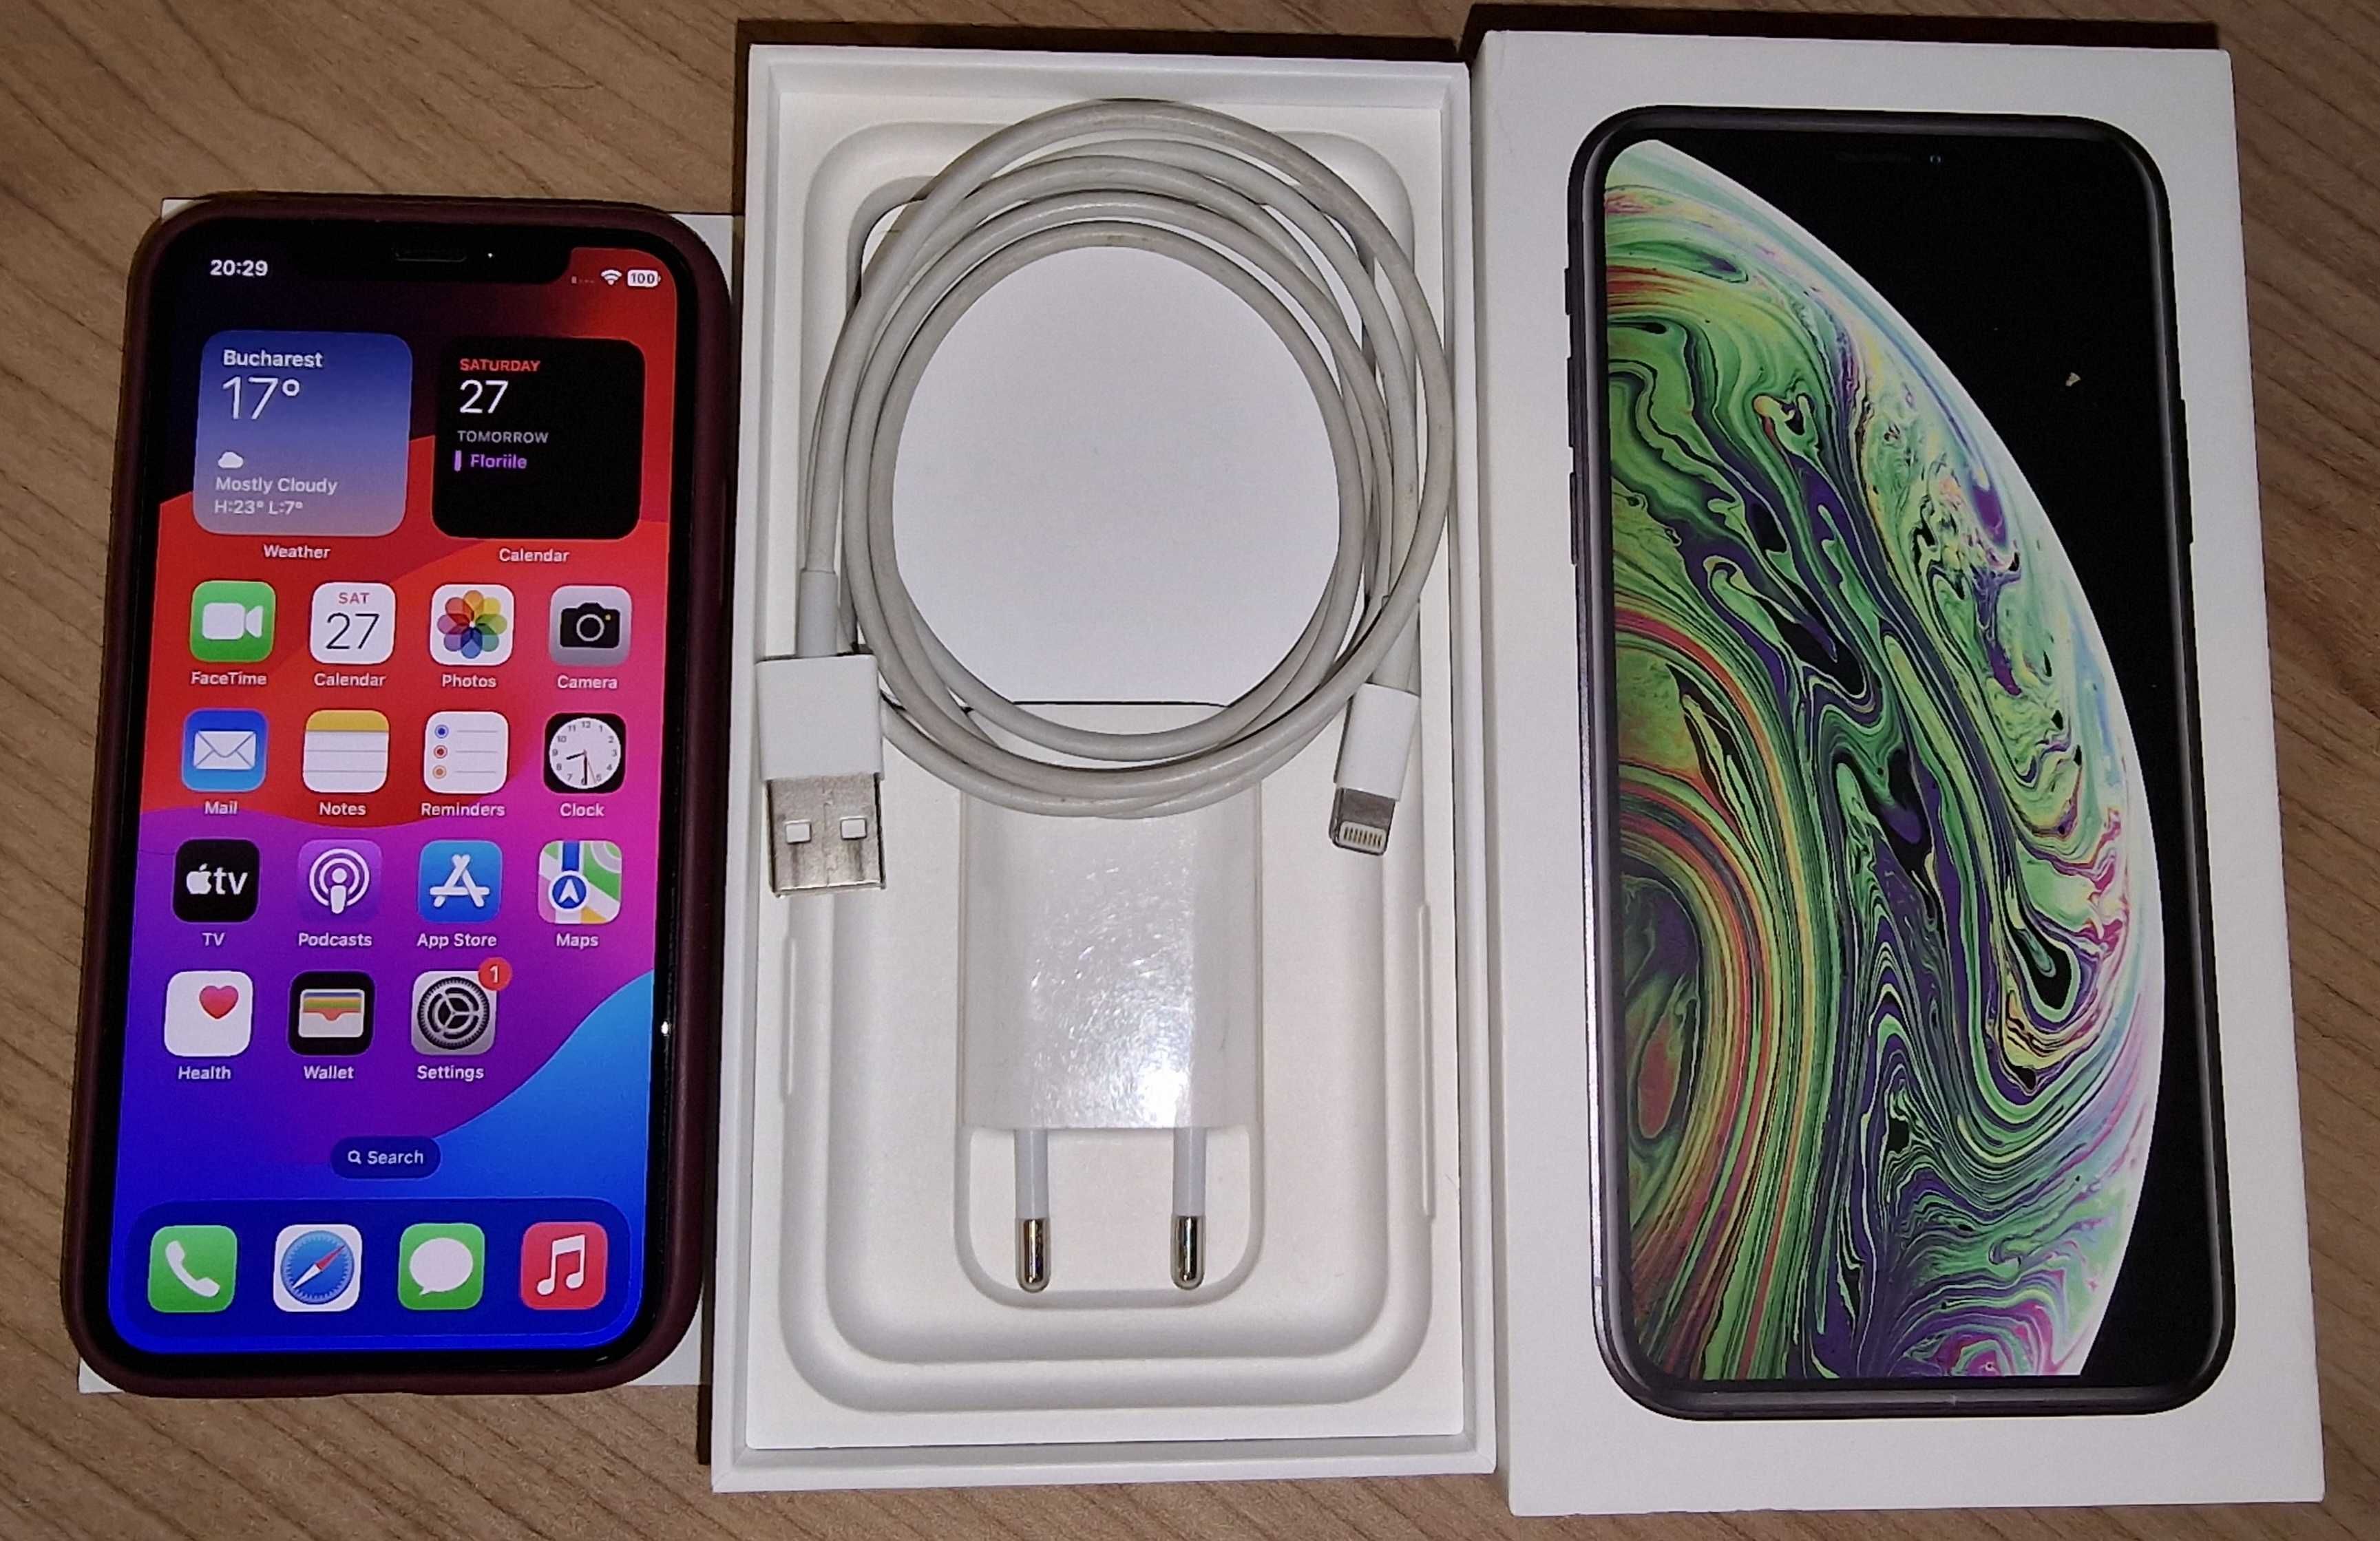 iPhone XS Negru 512 GB impecabil perfect functional